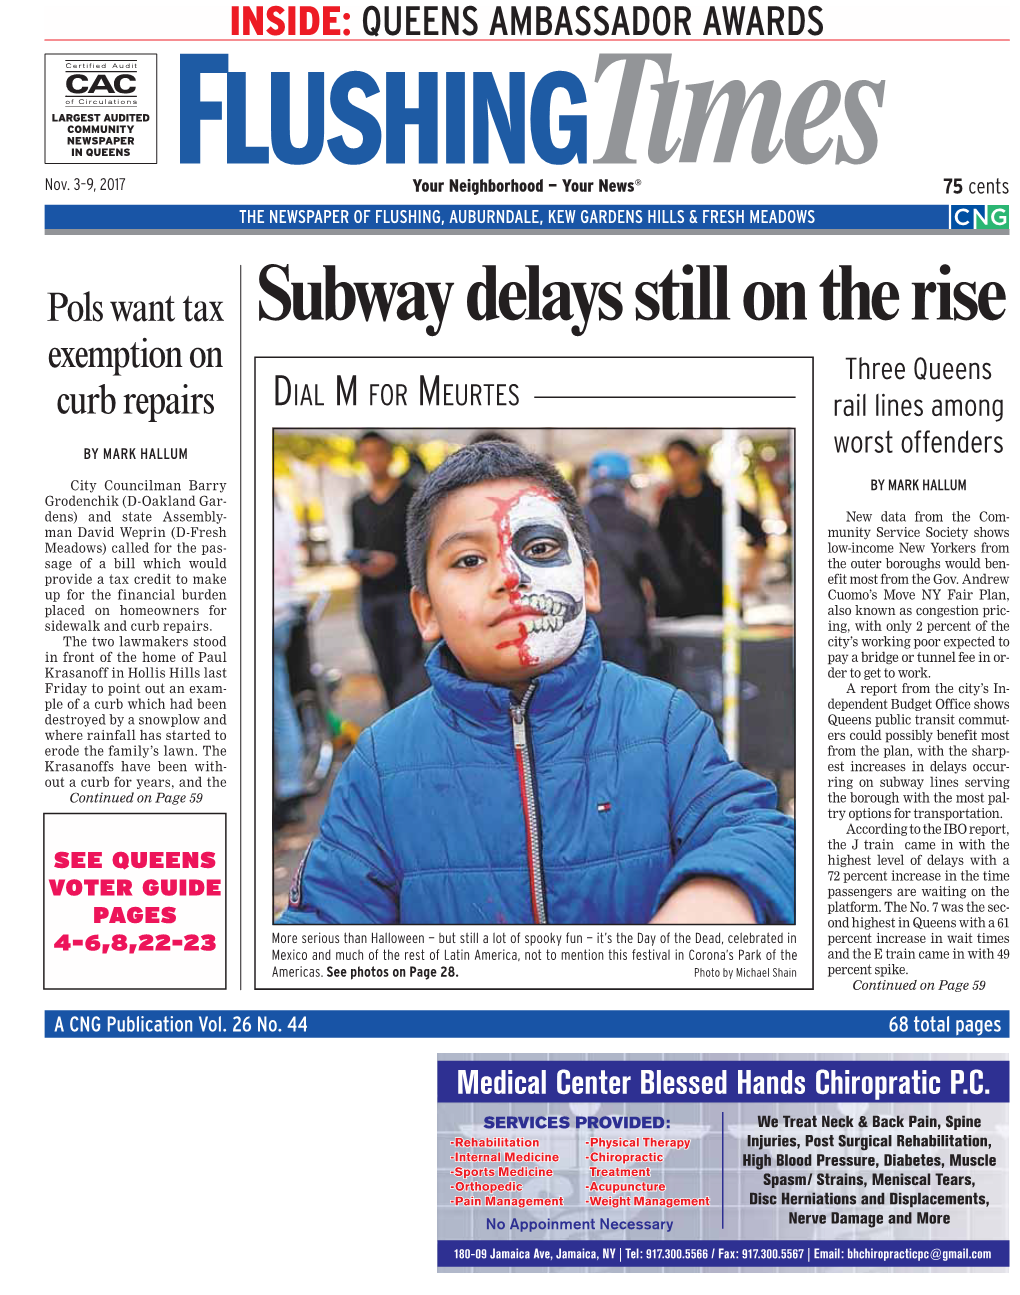 Subway Delays Still on the Rise Exemption on Three Queens Curb Repairs DIAL M for MEURTES Rail Lines Among